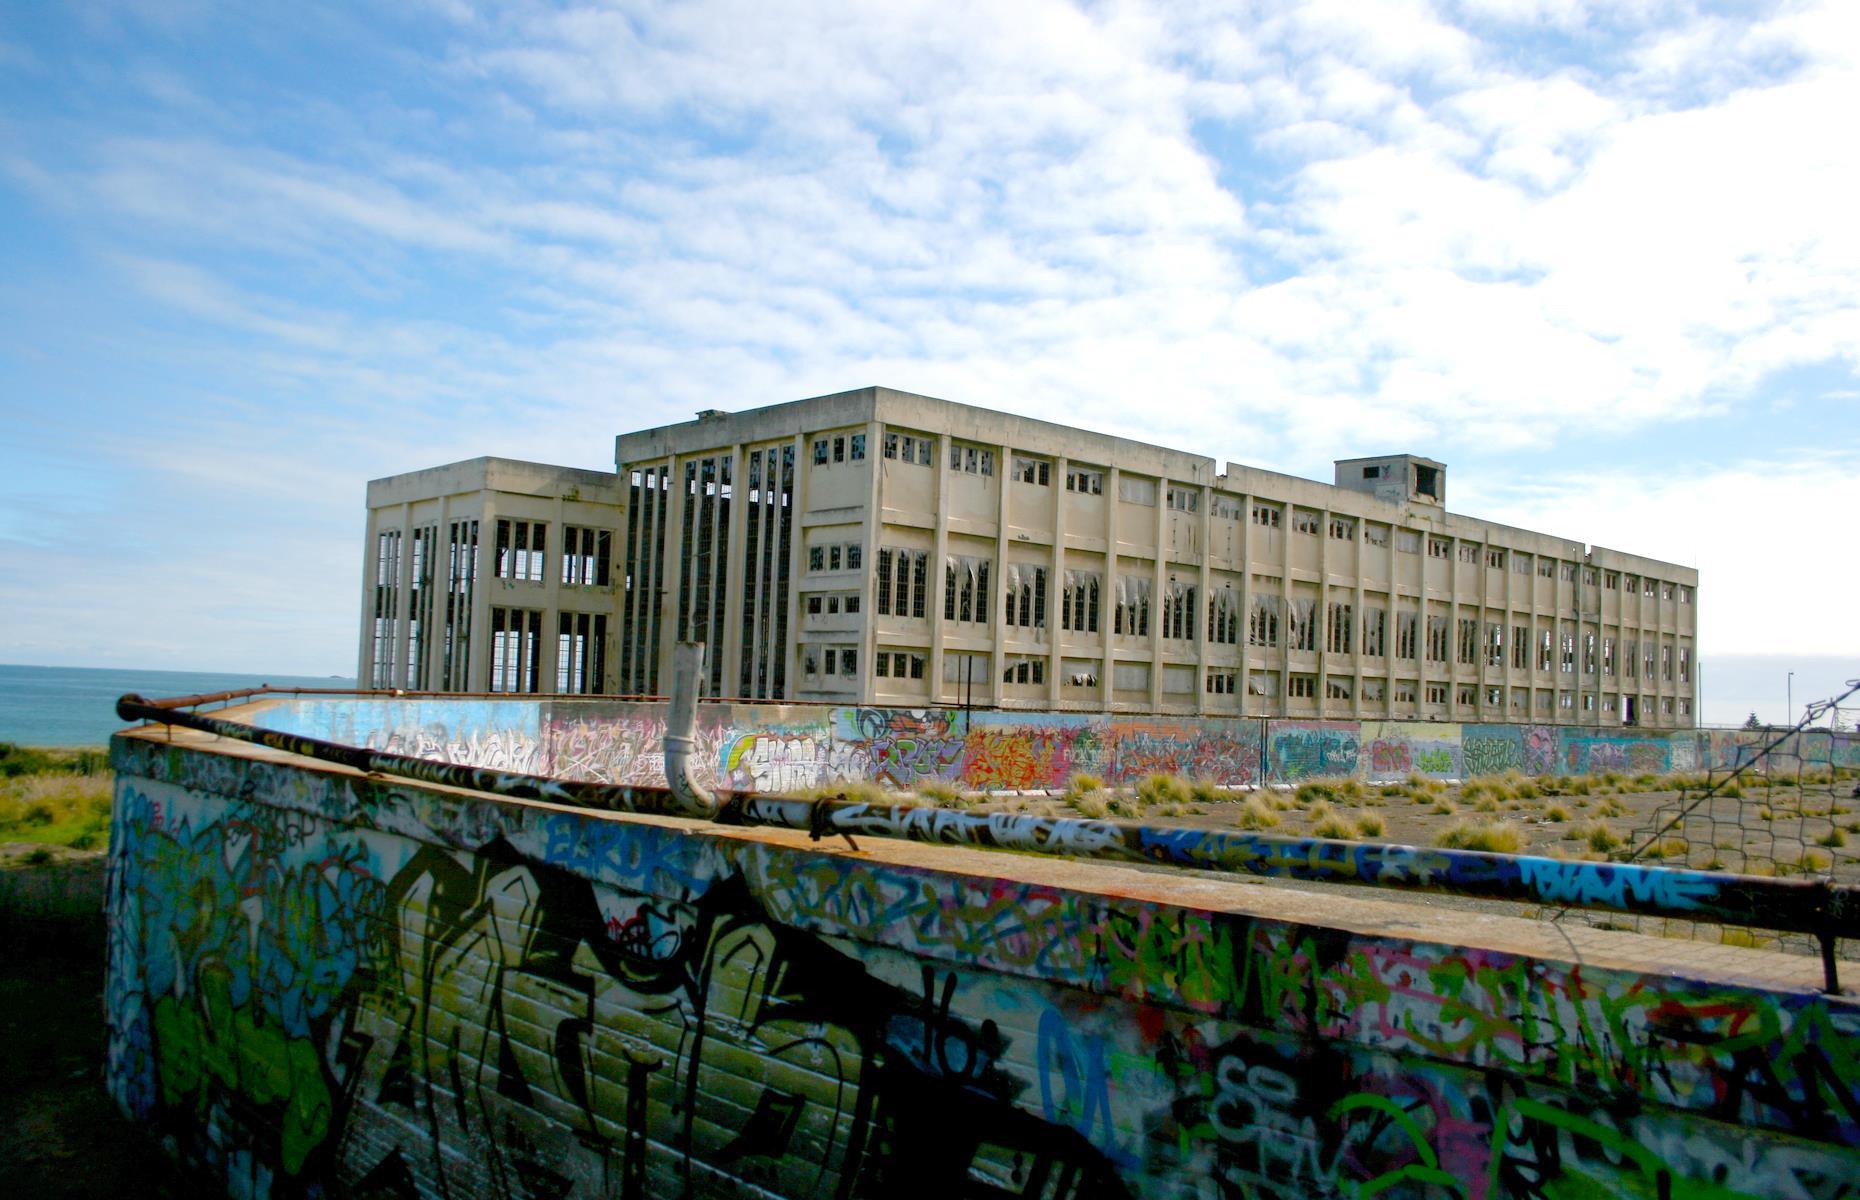 <p>Once considered an eyesore, now hailed as an iconic coastal landmark, the sprawling South Fremantle Power Station opened in 1951 by C Y O'Connor Beach in North Coogee. It closed in 1985 when its chimney stacks were demolished but the rest of the building was left to decline. There has been much debate over the fate of the power plant, which is now heritage-listed structure. It was recently sold by the state government to a private buyer so new life may be breathed into its weather-beaten shell yet. </p>